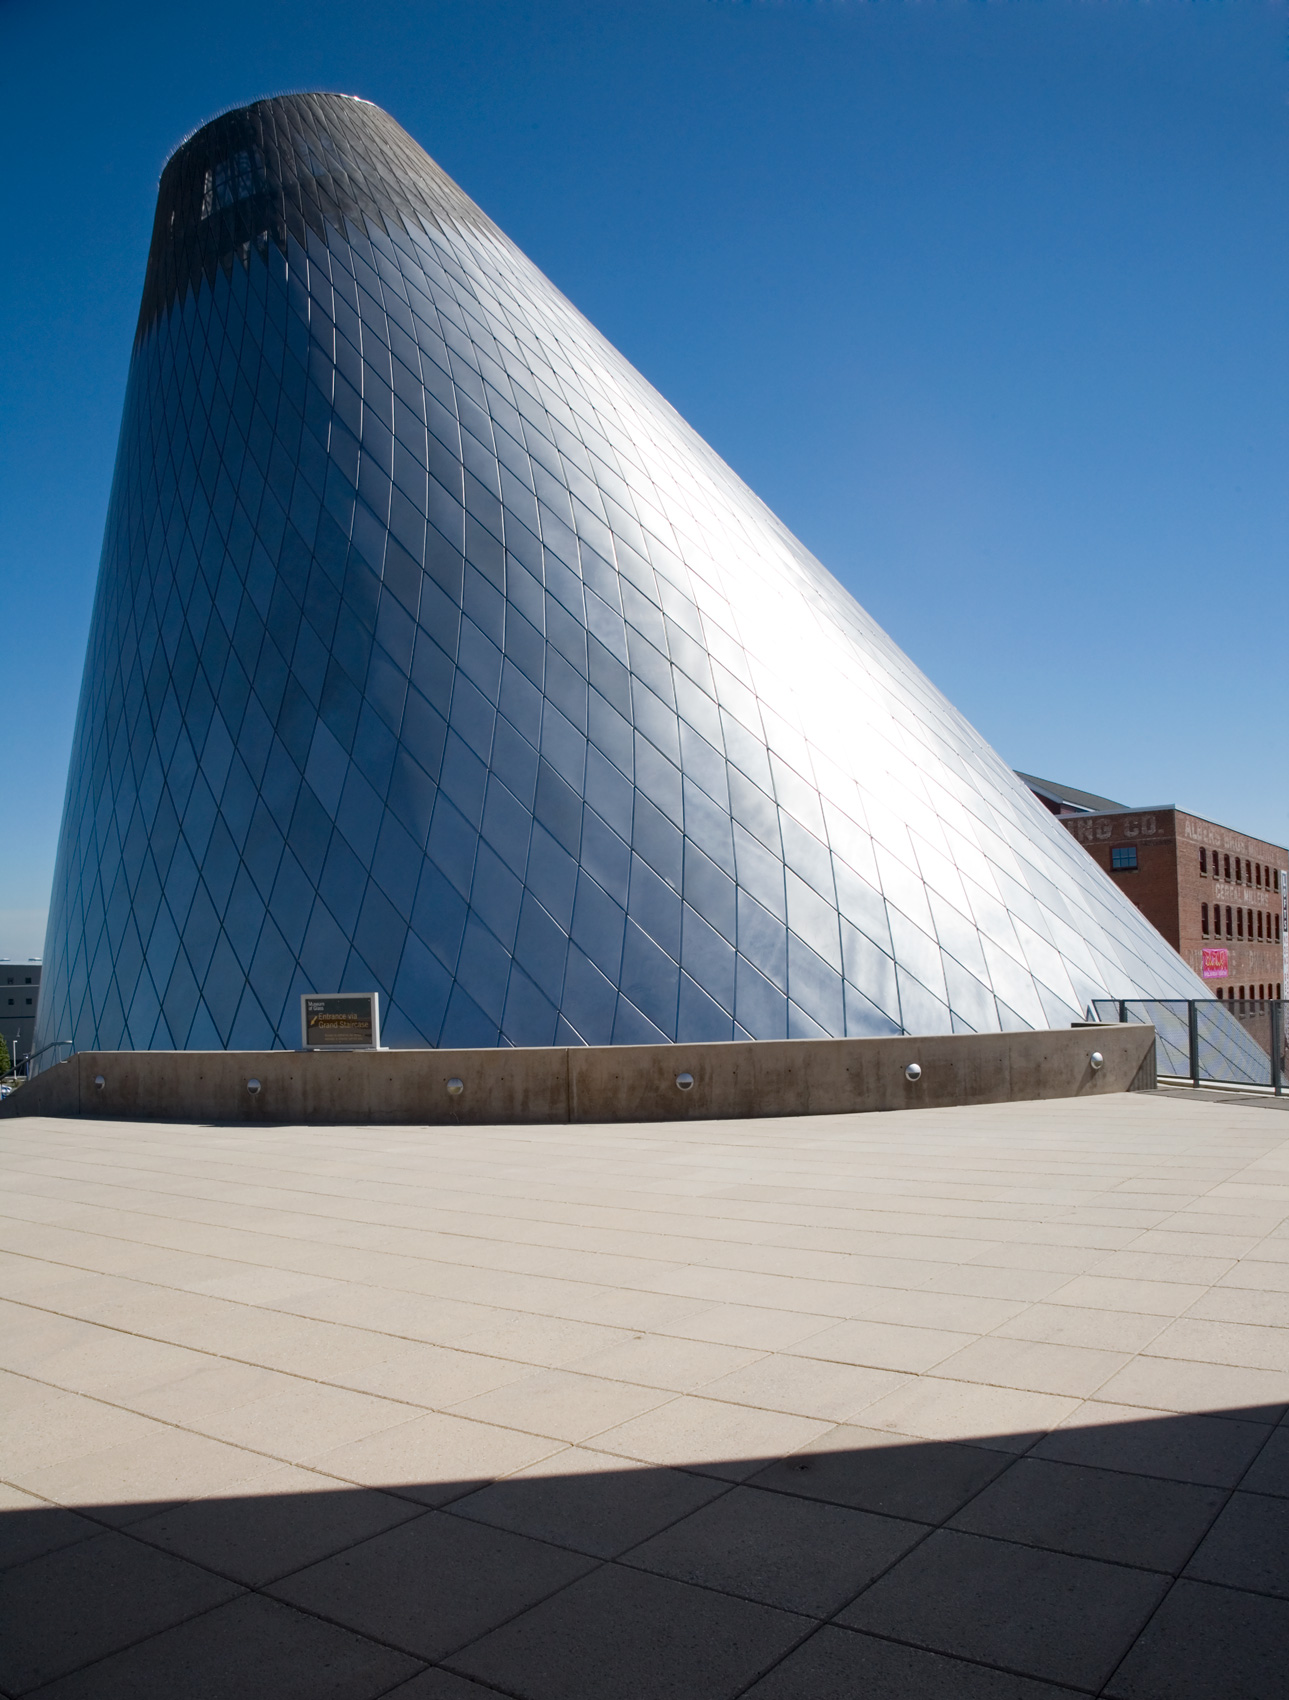 stainless steel–clad cone of the museum of glass in Tacoma